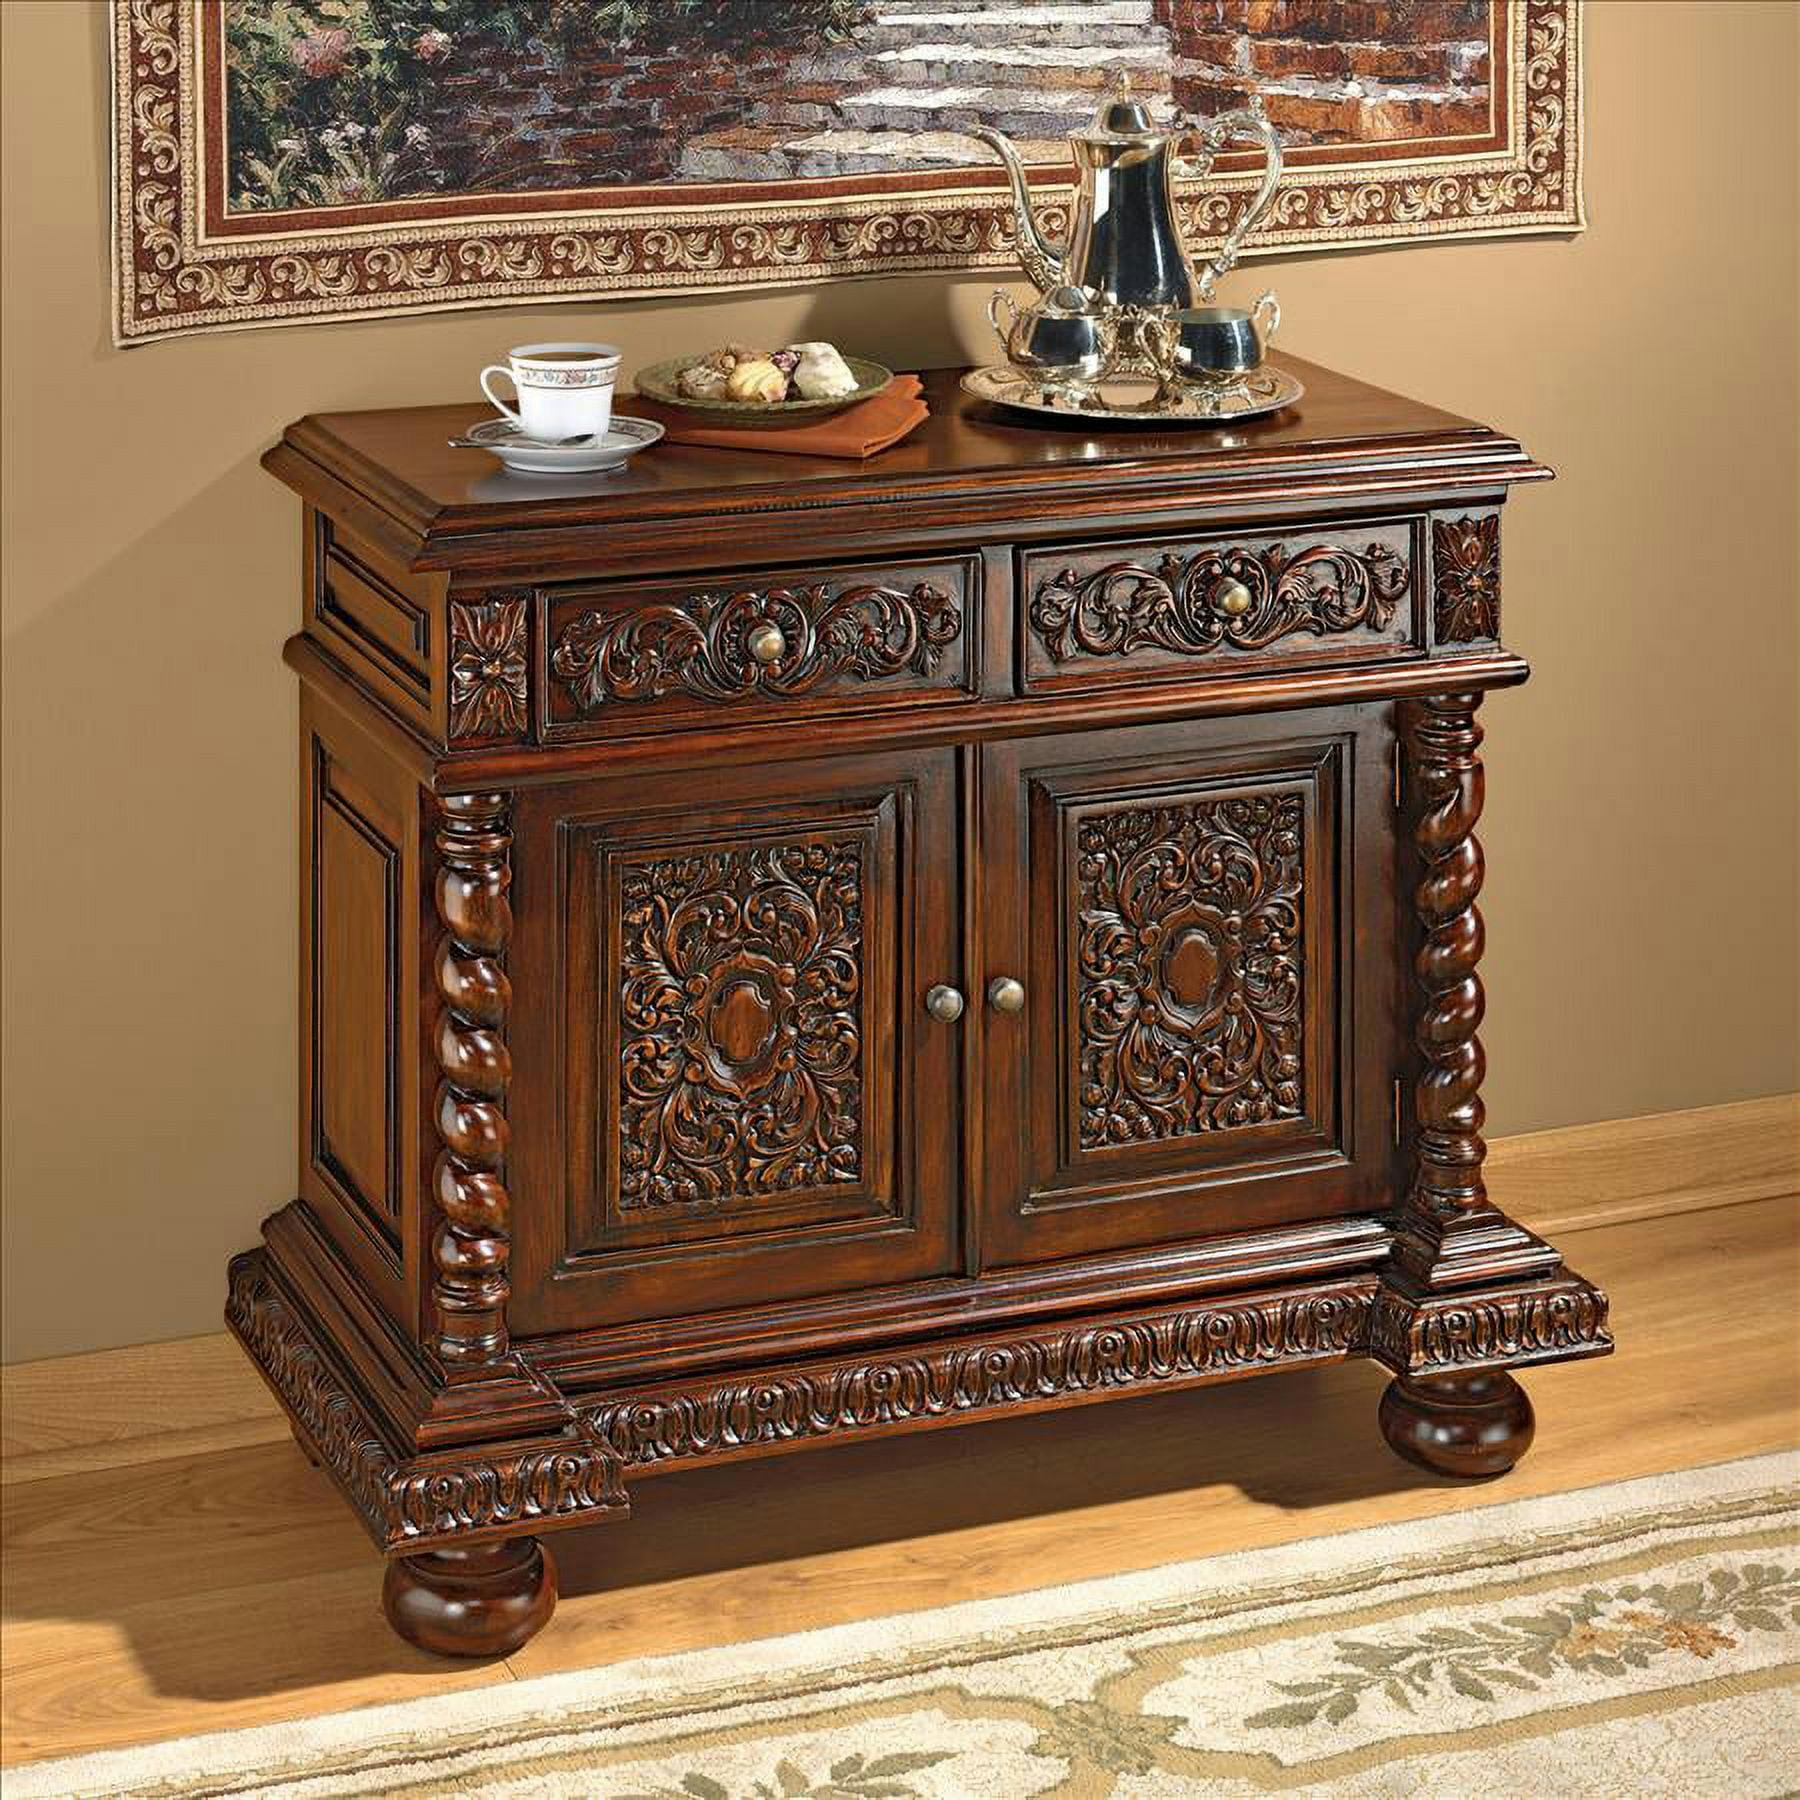 Gothic Renaissance Inspired Solid Mahogany Buffet with Barley Twist Columns